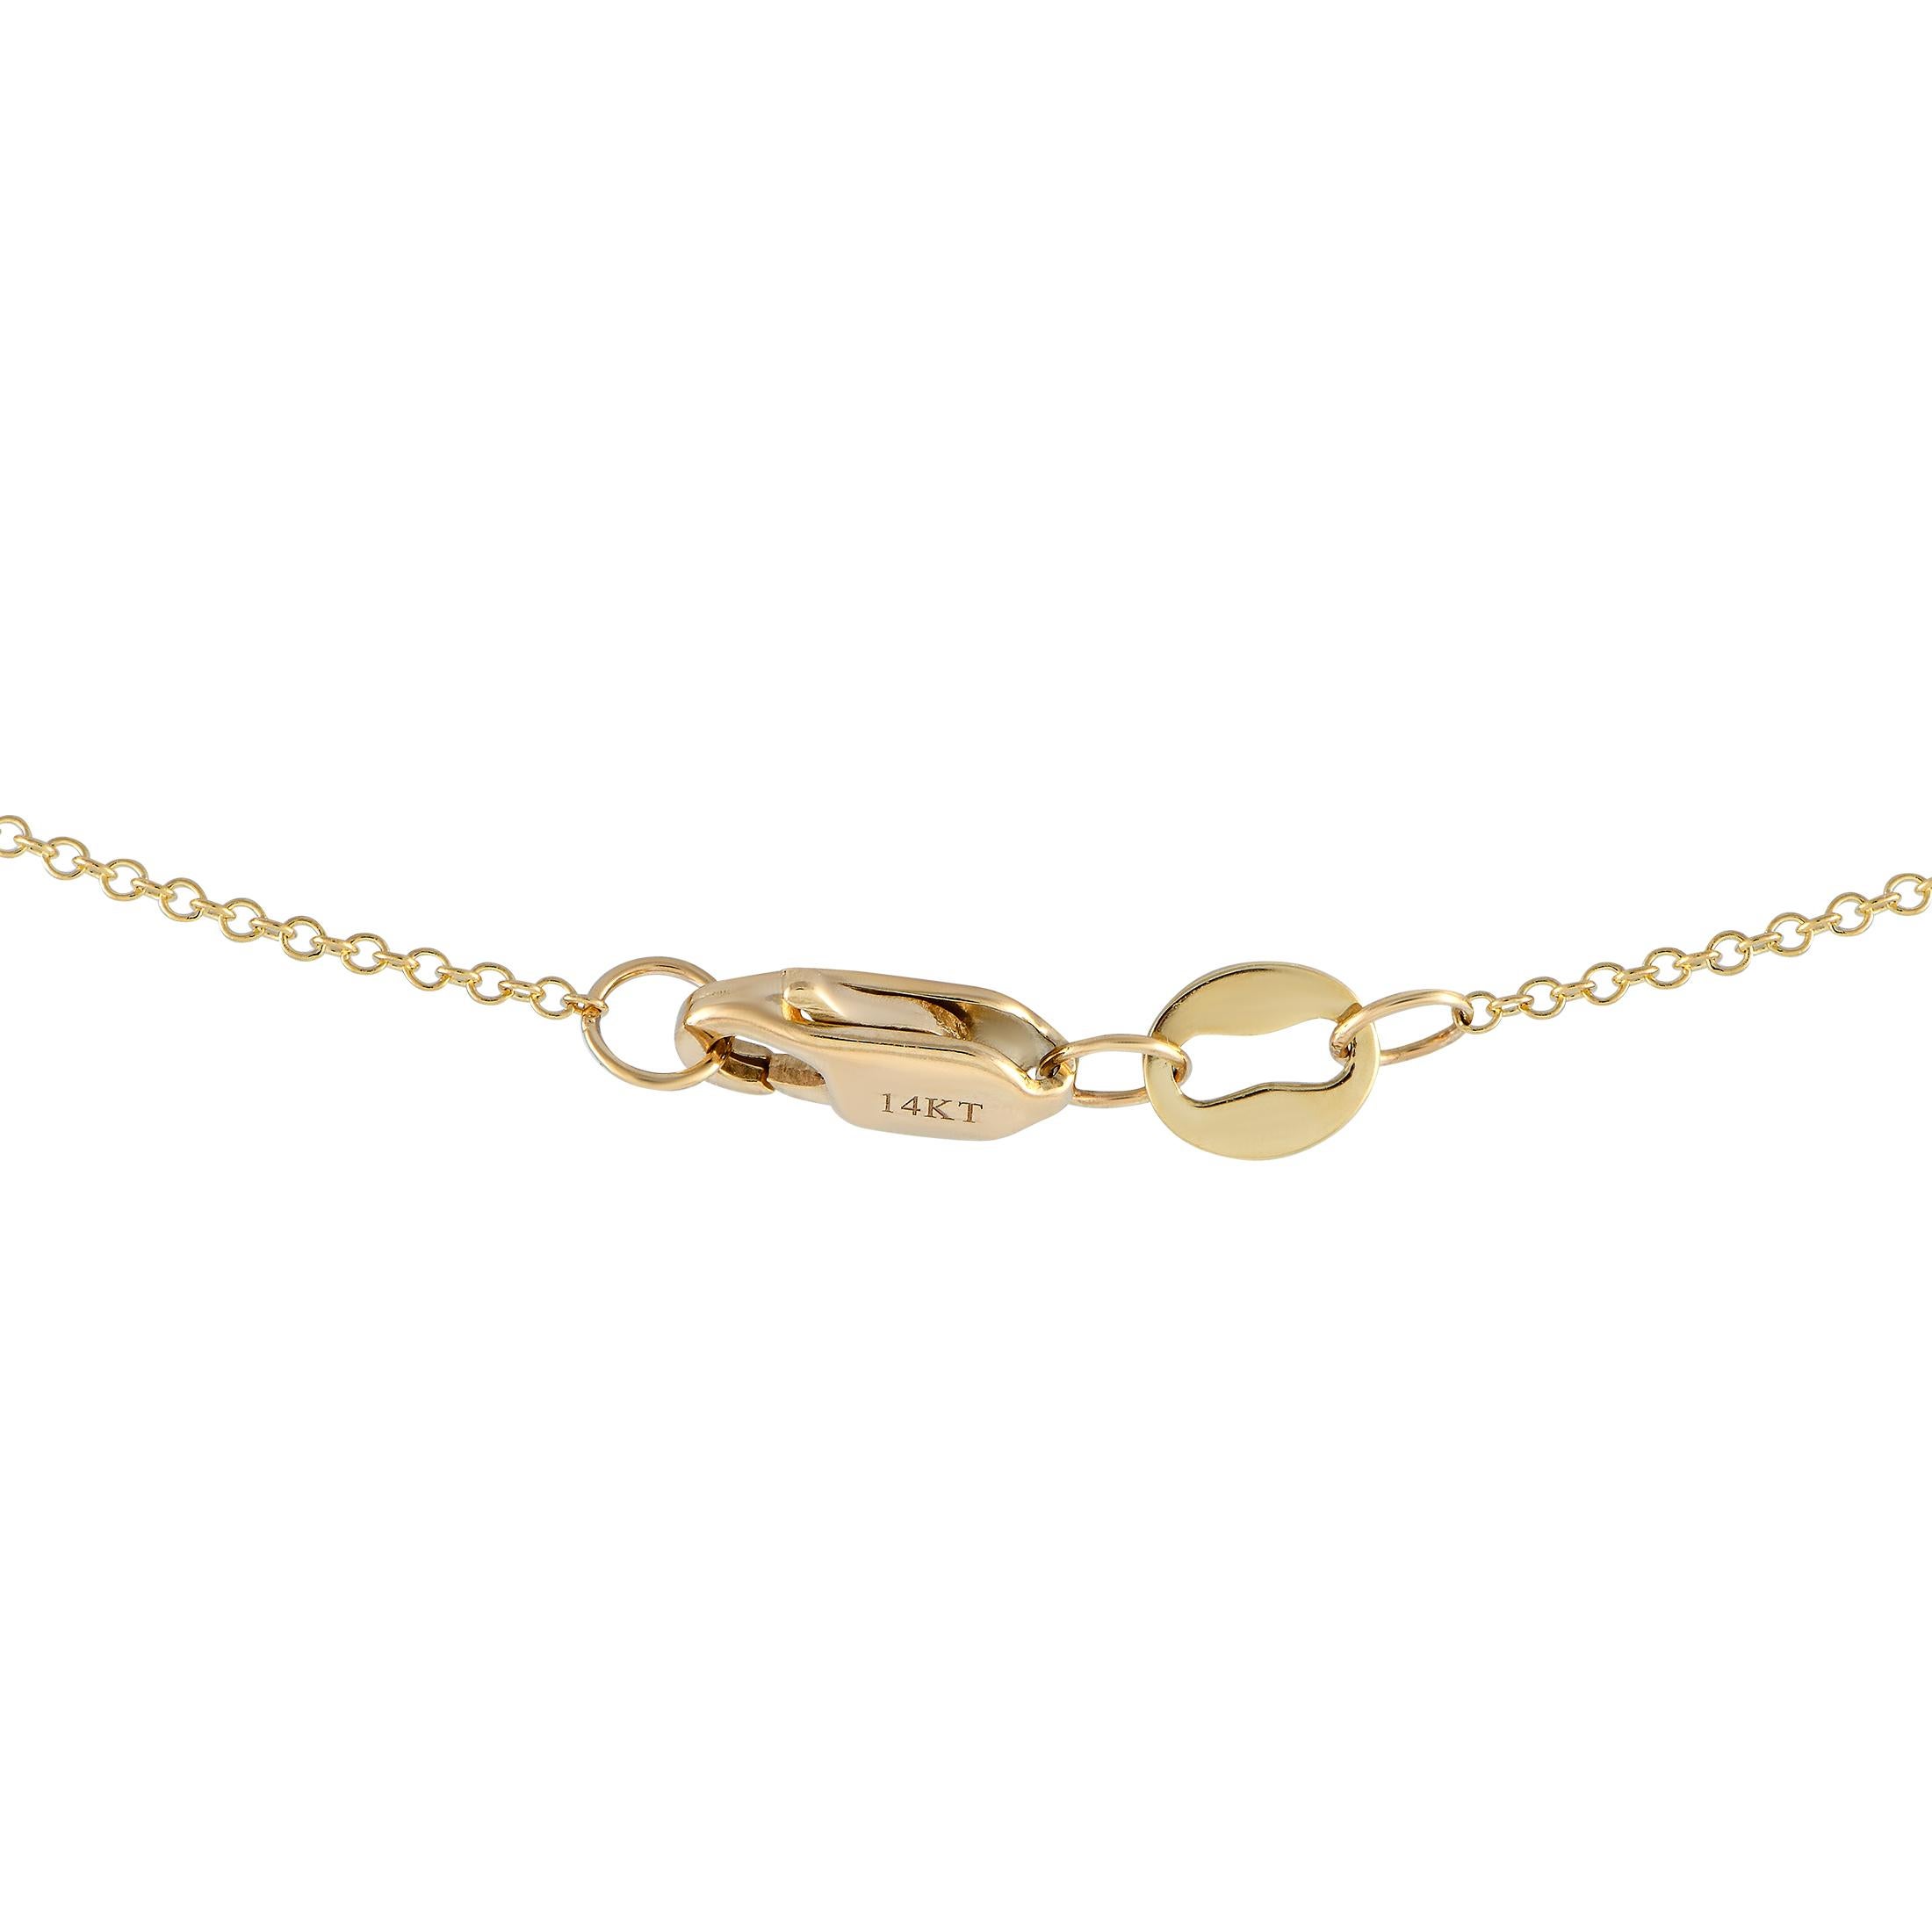 A minimalist piece of jewelry that still packs a statement. This LB Exclusive necklace has a 16\